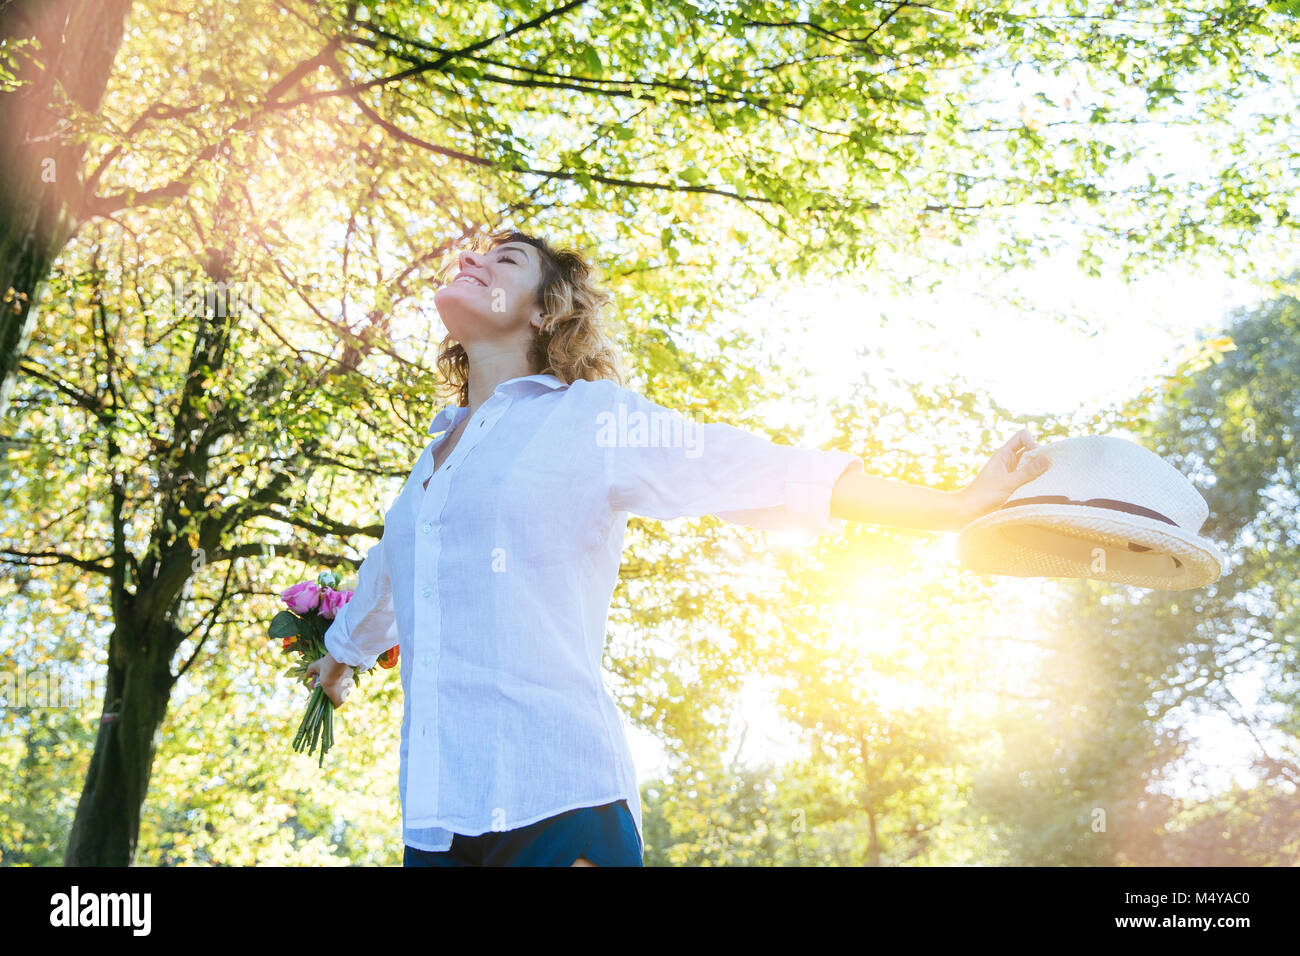 Enjoying the nature. Young woman arms raised enjoying the fresh air in green forest. Stock Photo